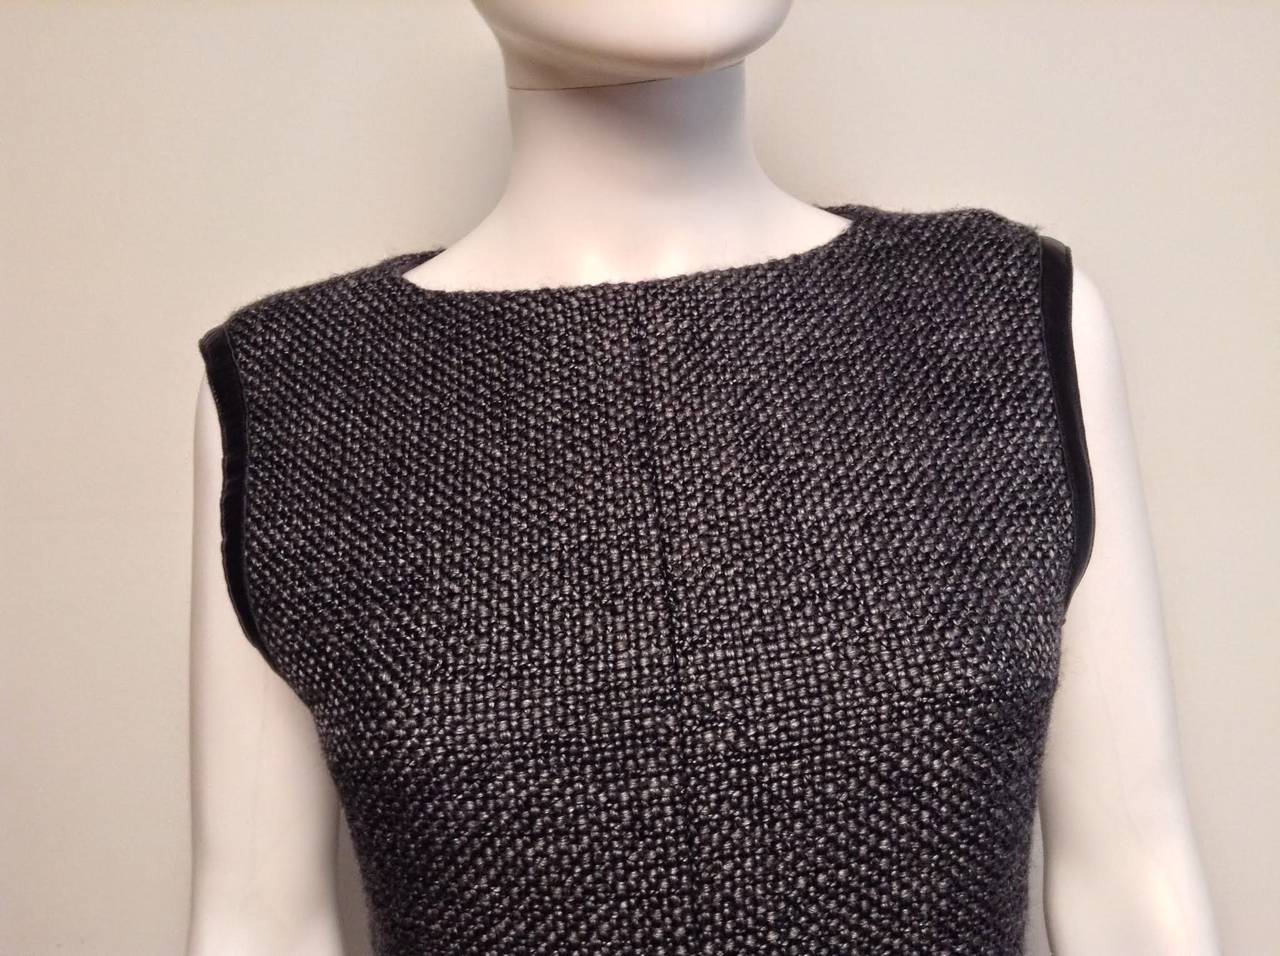 Classic and beautifully tailored Chanel grey wool vest and skirt suit. 

Skirt hem is trimmed in leather, invisible zip closure. 

Vest top has 7 gunmetal grey Chanel branded buttons at the back, arm holes are trimmed in leather, 

From